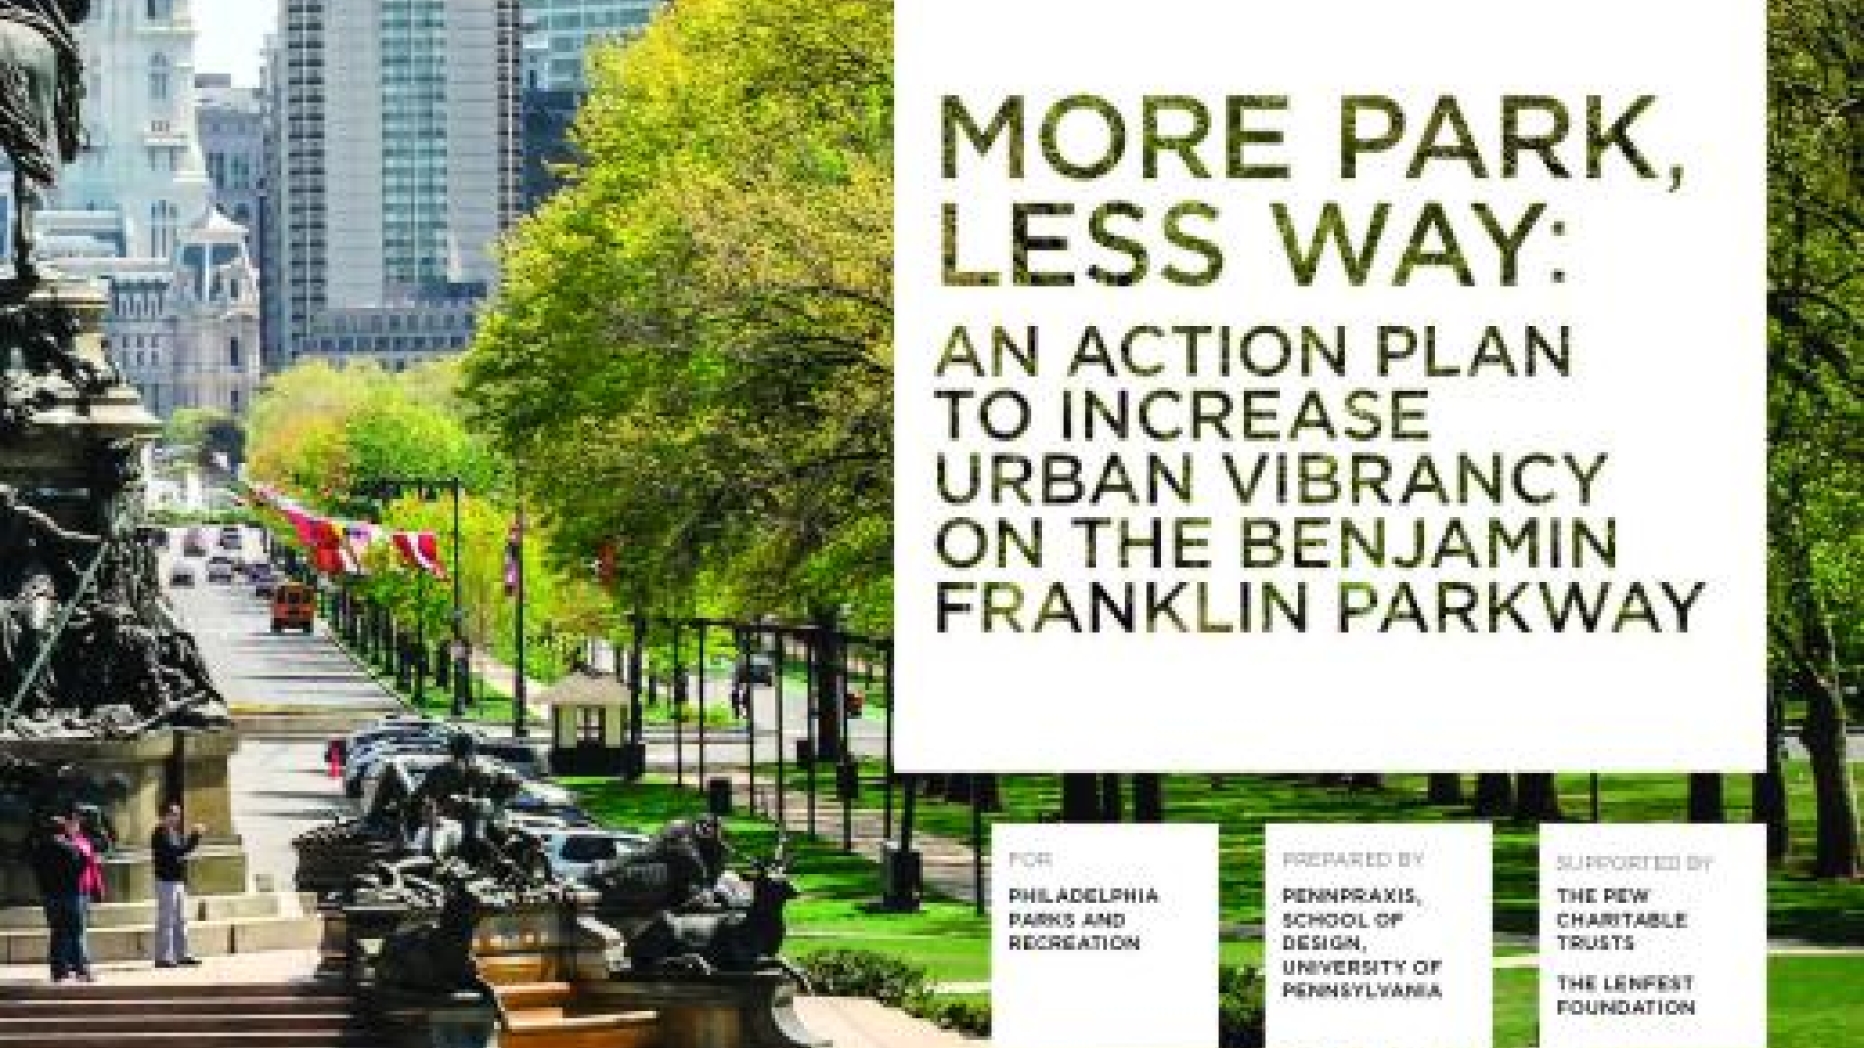 Photograph looking down the full stretch of Benjamin Franklin Parkway. Text: "More Park Less Way: An action plan to increase urban vibrancy on the Benjamin Franklin Parkway." 